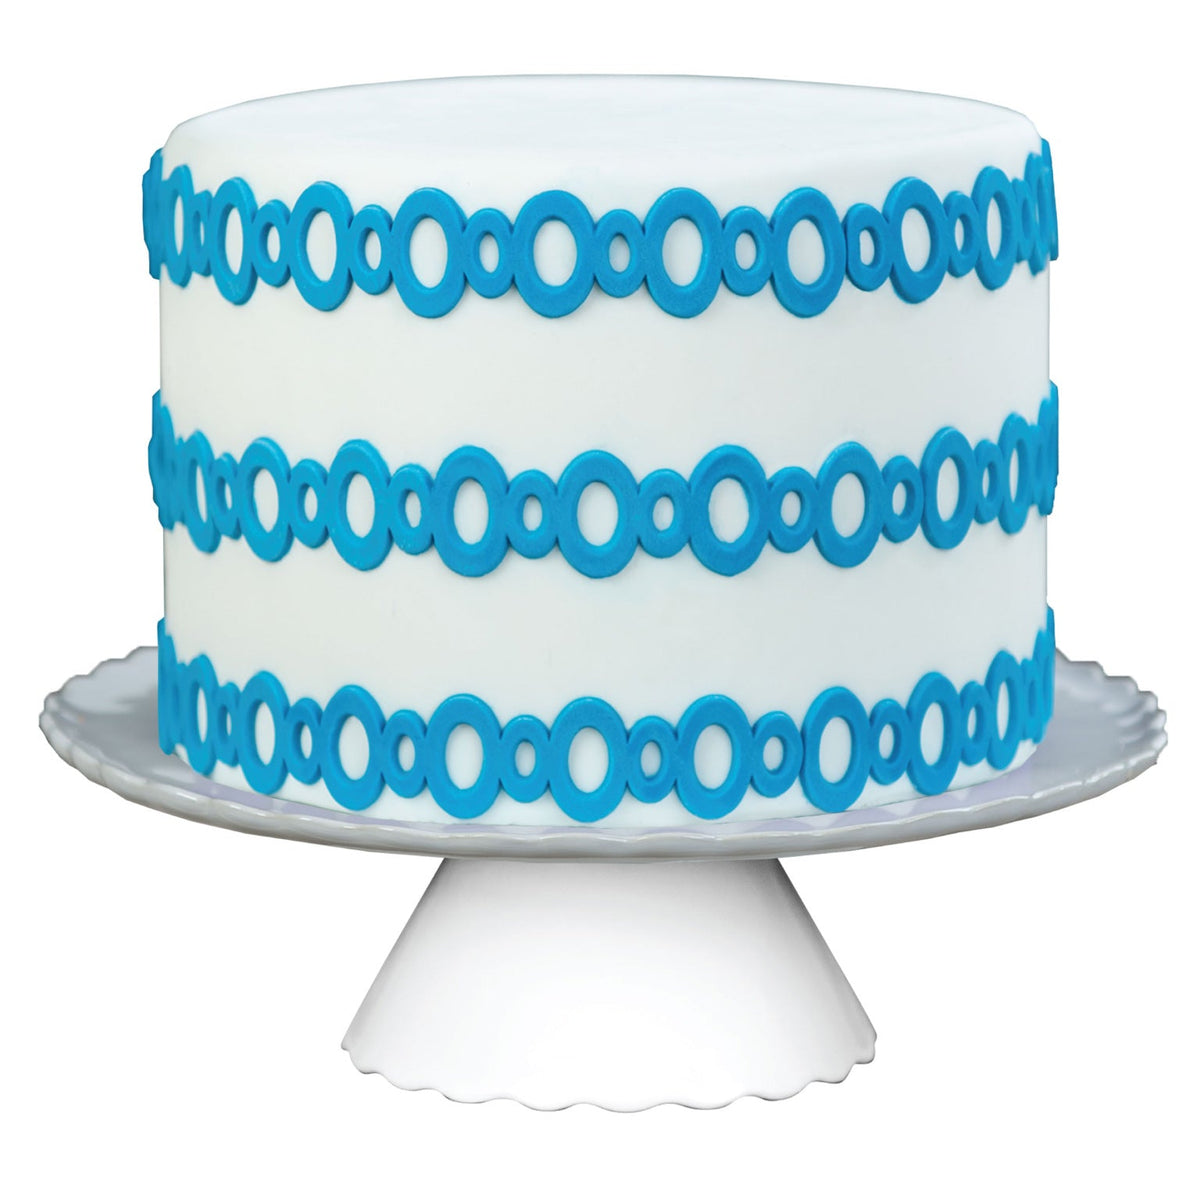 Decorated Cake Image showing the Ooh La La Food Safe Silicone Onlay for Fondant Cake Decorating by Marvelous Molds